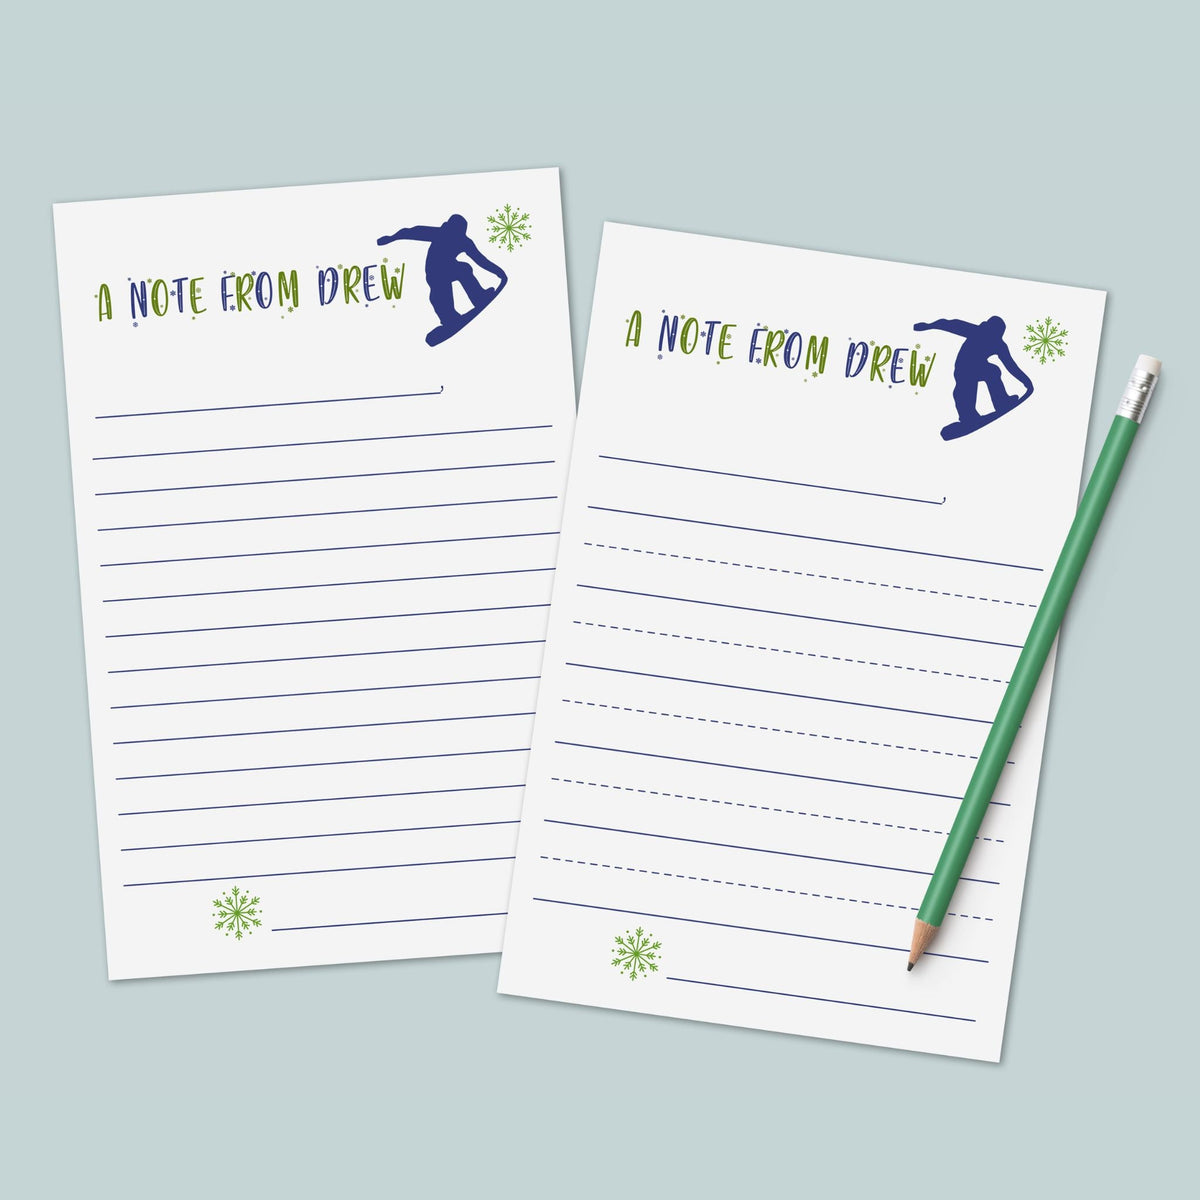 Snowboarder - Personalized Lined Letter Writing Stationery - The Note House